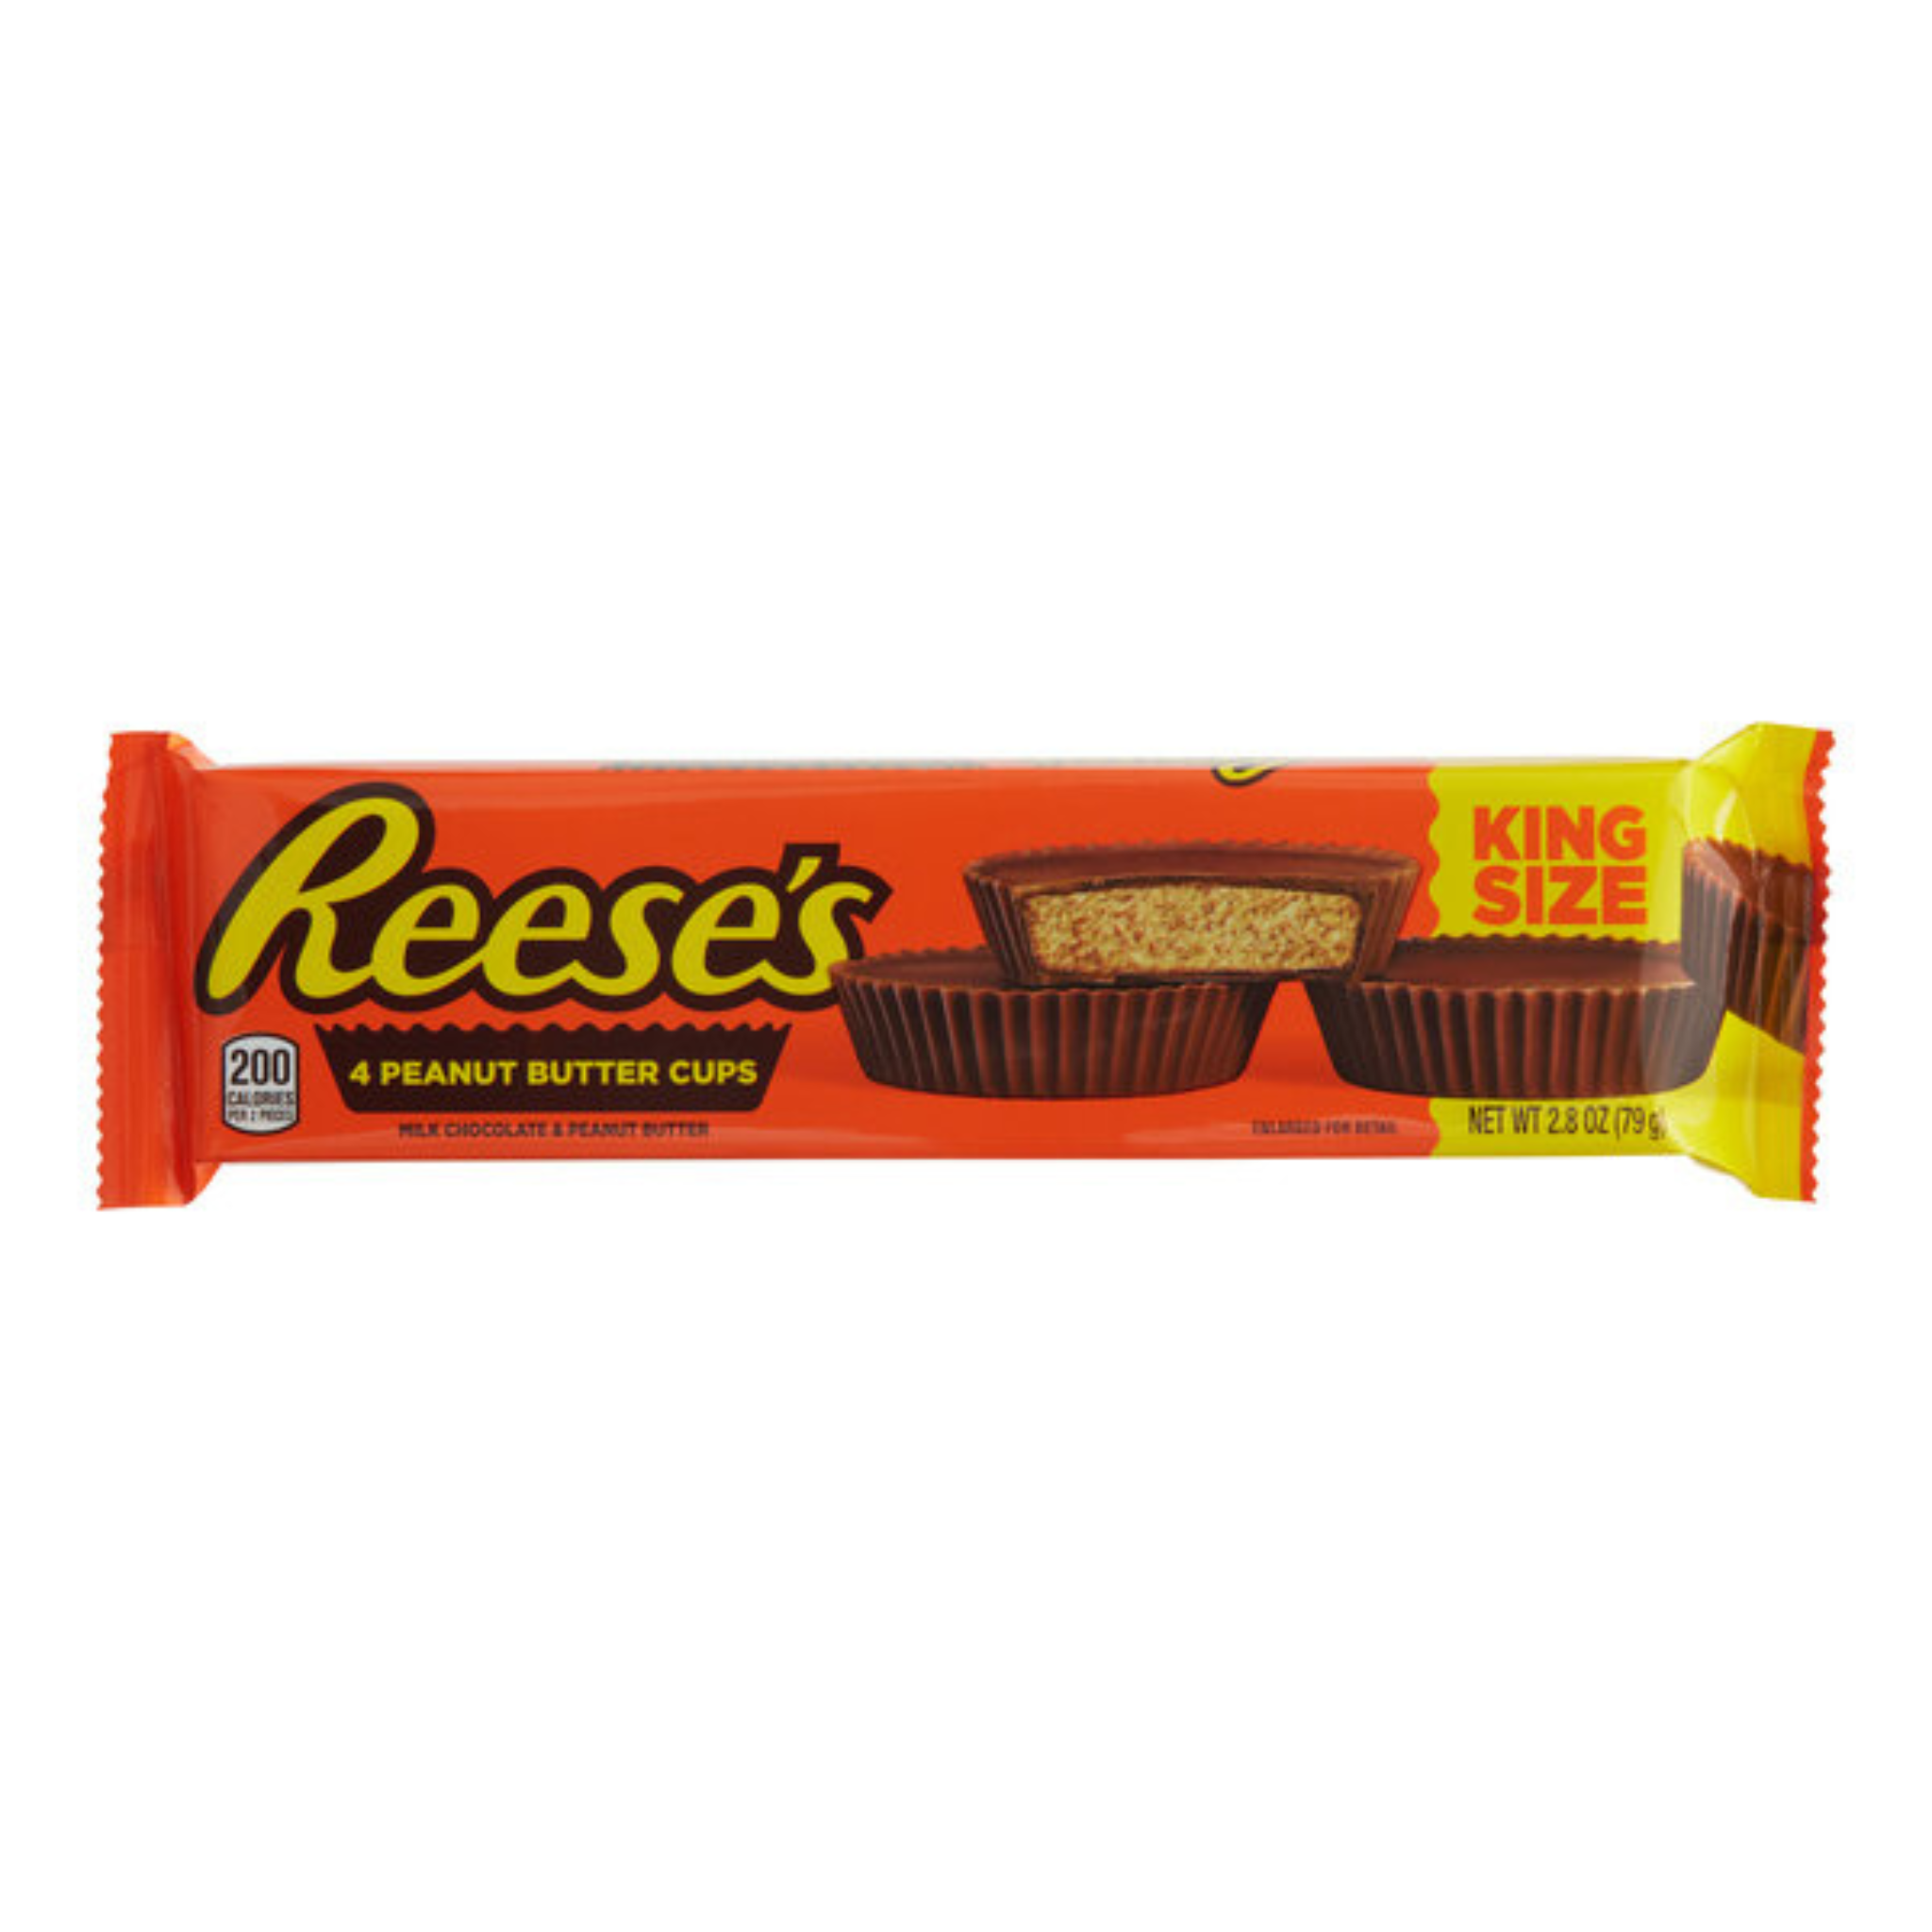 Reeses King Size